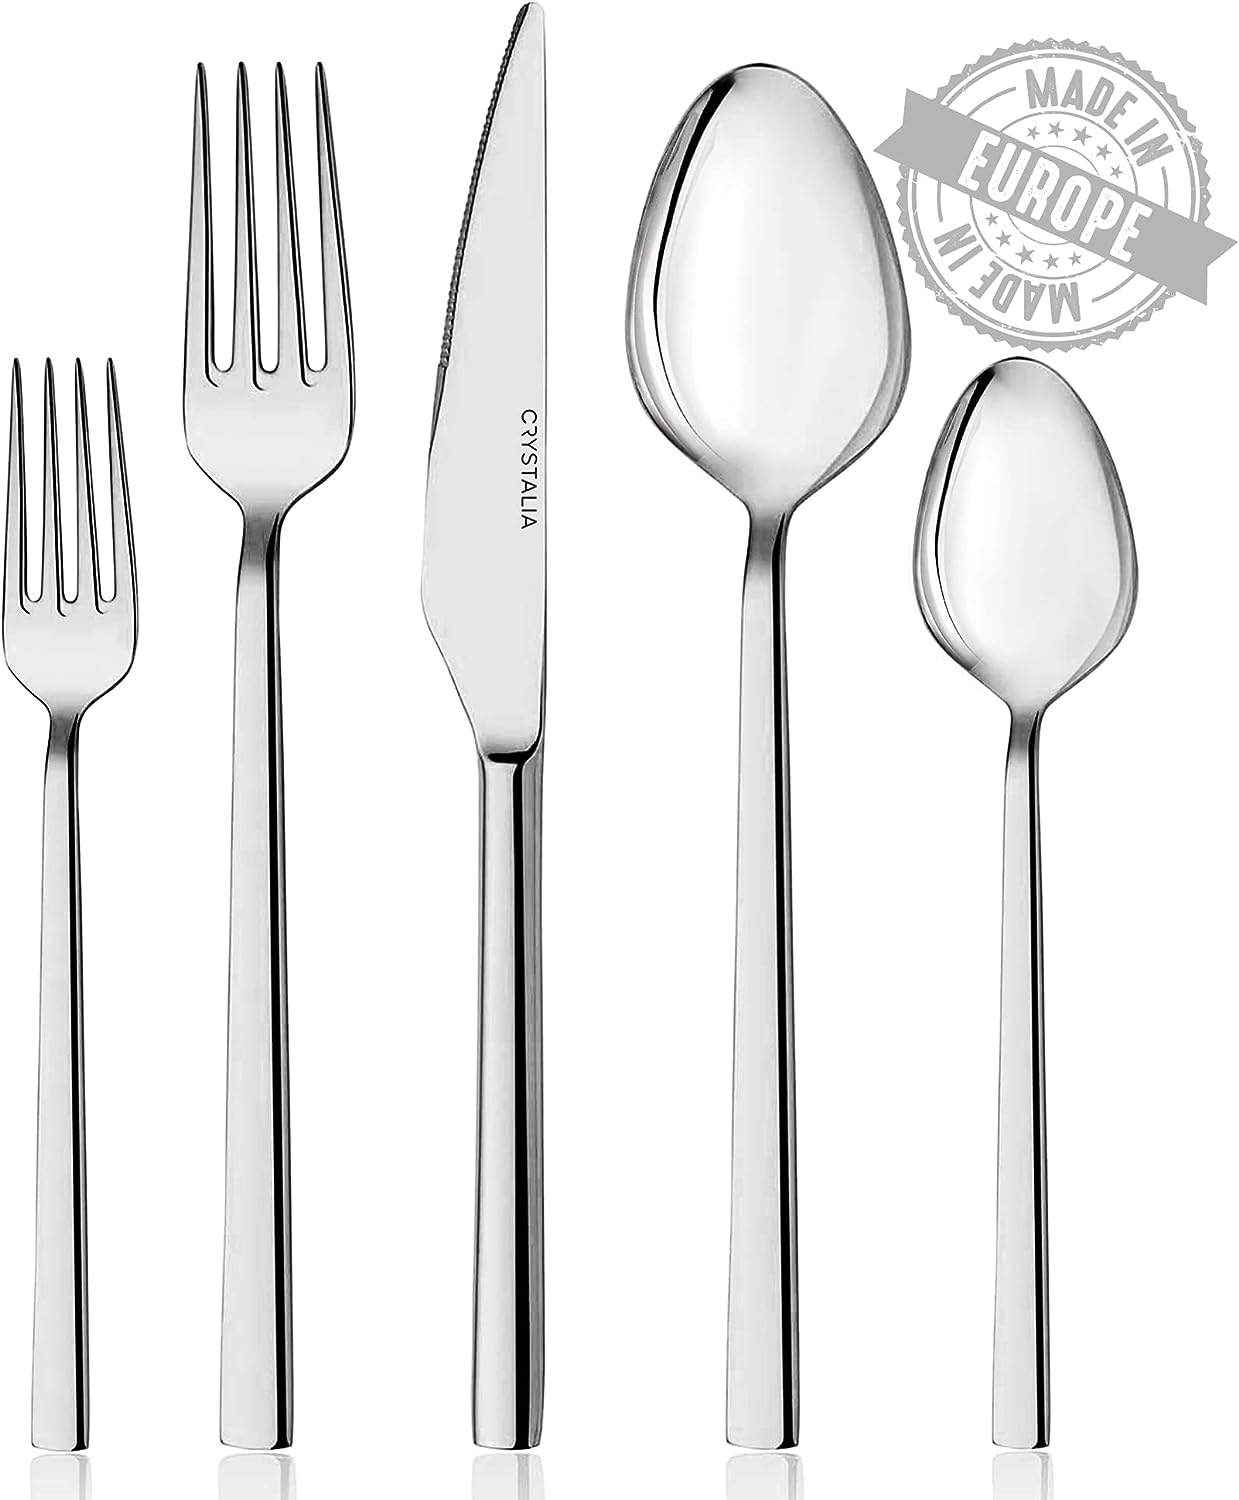 Homikit 36-Piece Silverware Flatware Set with Serving Utensils, Stainless  Steel Square Cutlery Set for 6, Eating Utensils Includes Fork Spoon Knife,  Dishwasher …